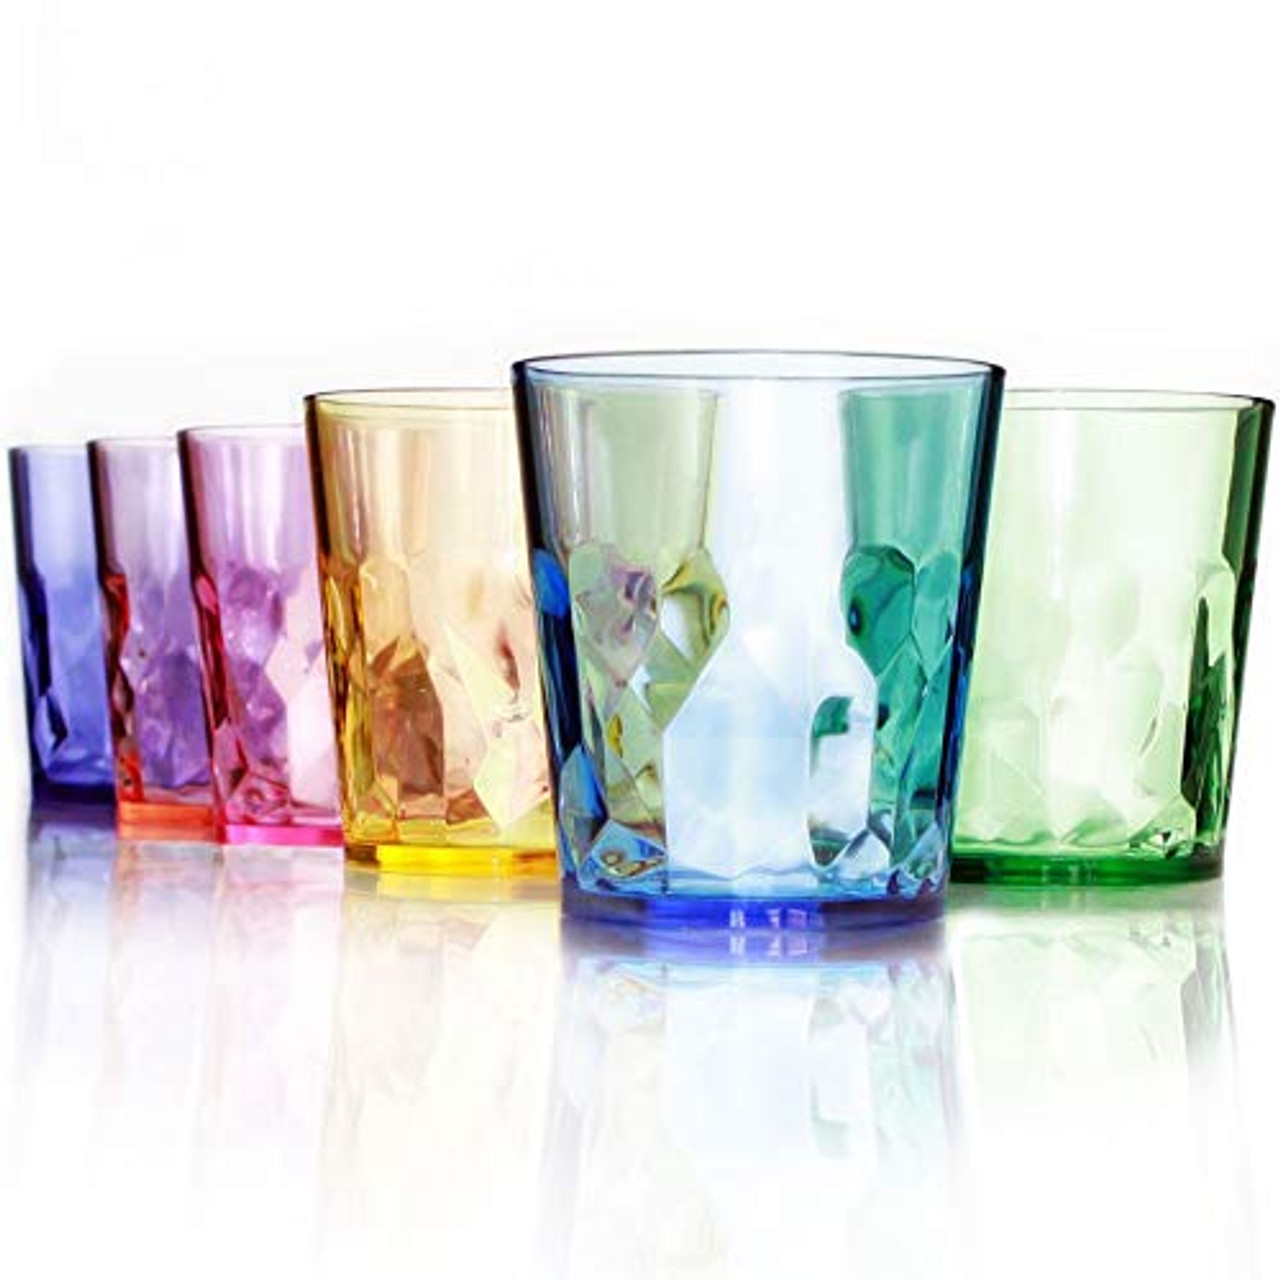 13 oz Unbreakable Premium Drinking Glasses - Set of 6 - Tritan Plastic  Tumbler Cups - Perfect for Gifts - BPA Free - Dishwasher Safe - Stackable